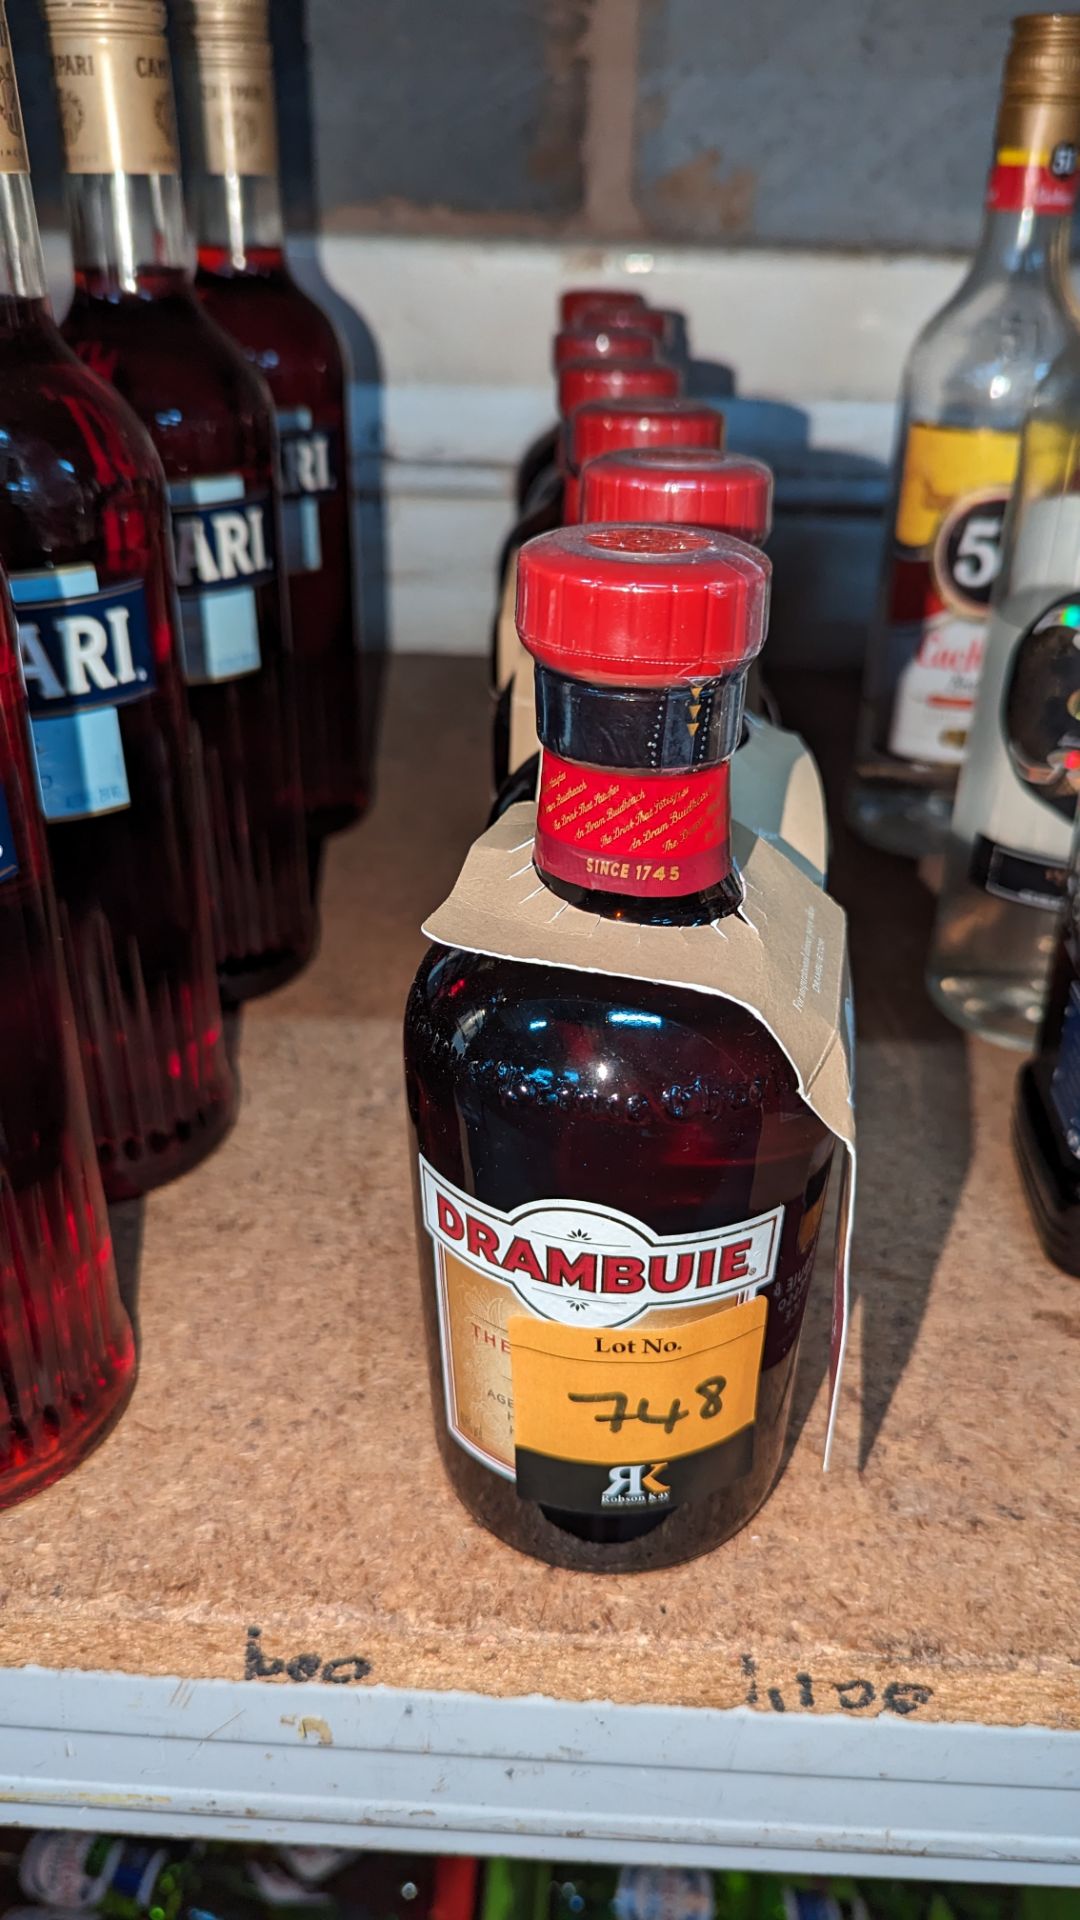 7 off 50cl bottles of Drambuie sold under AWRS number XQAW00000101017